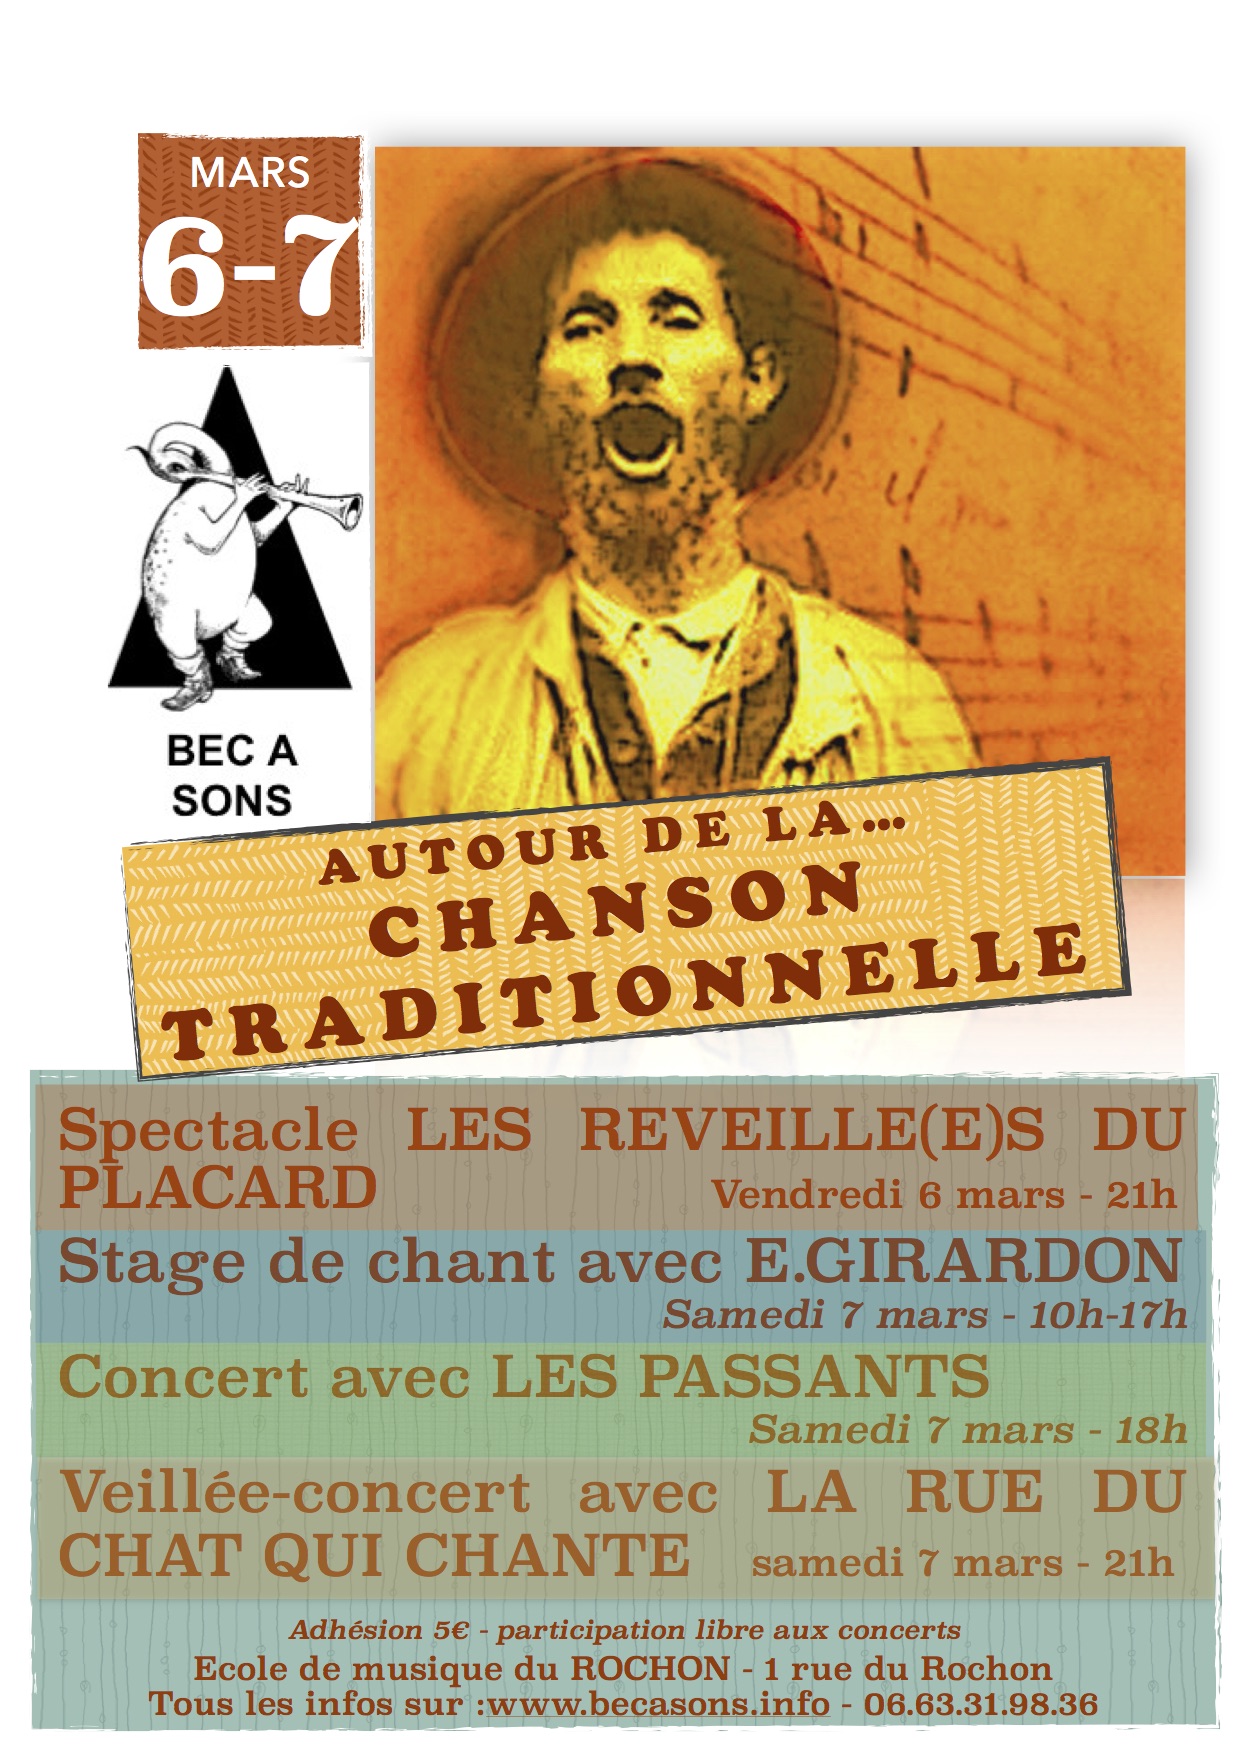 Evenement chansons mars 2015.pages.jpg